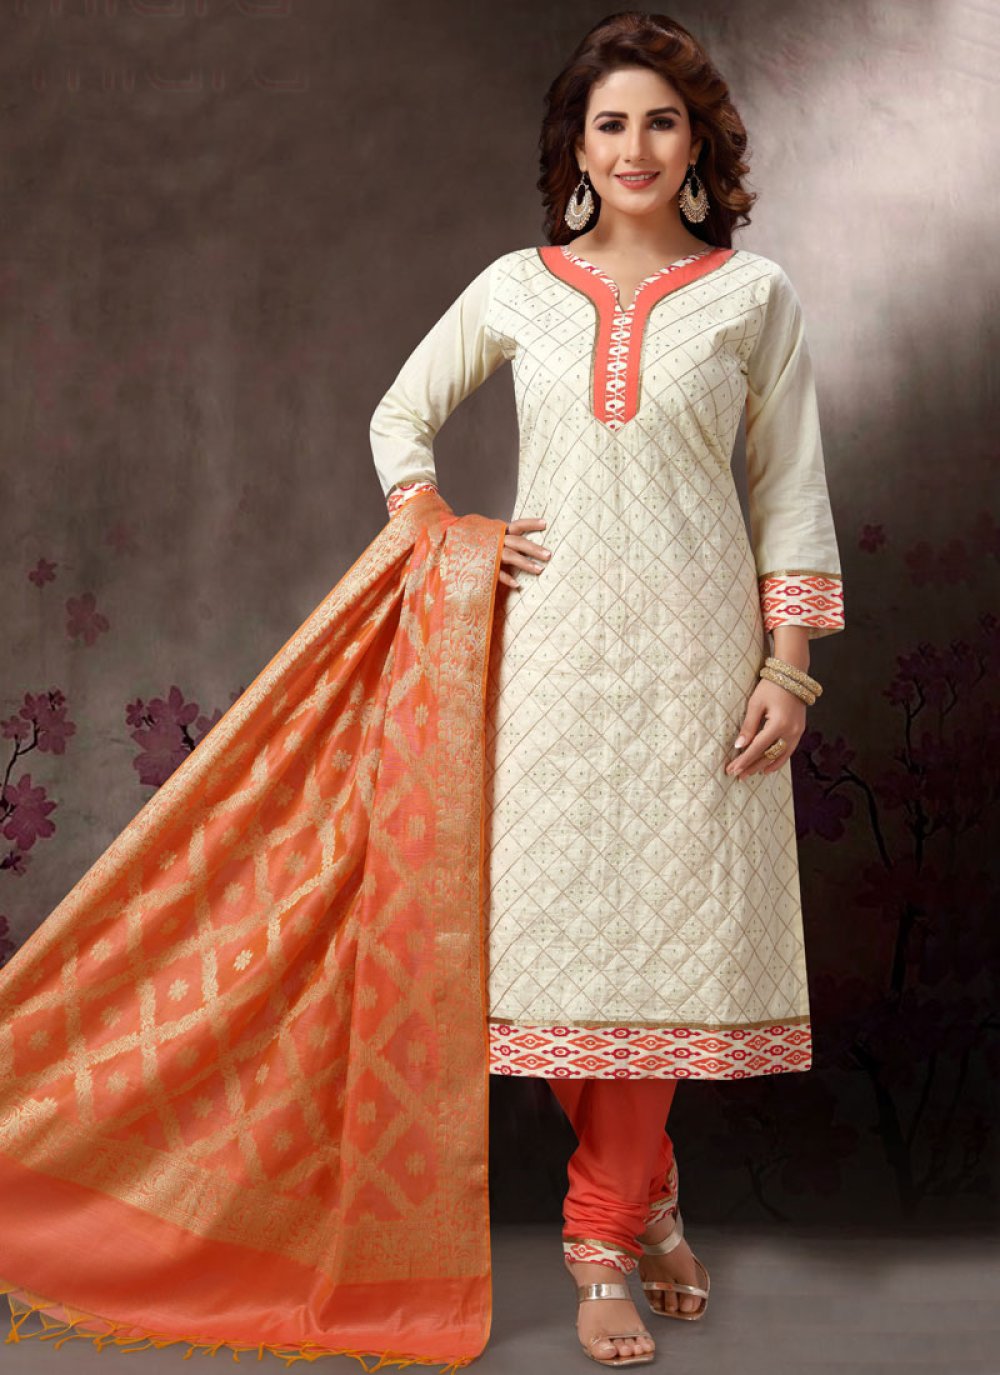 red and white churidar designs